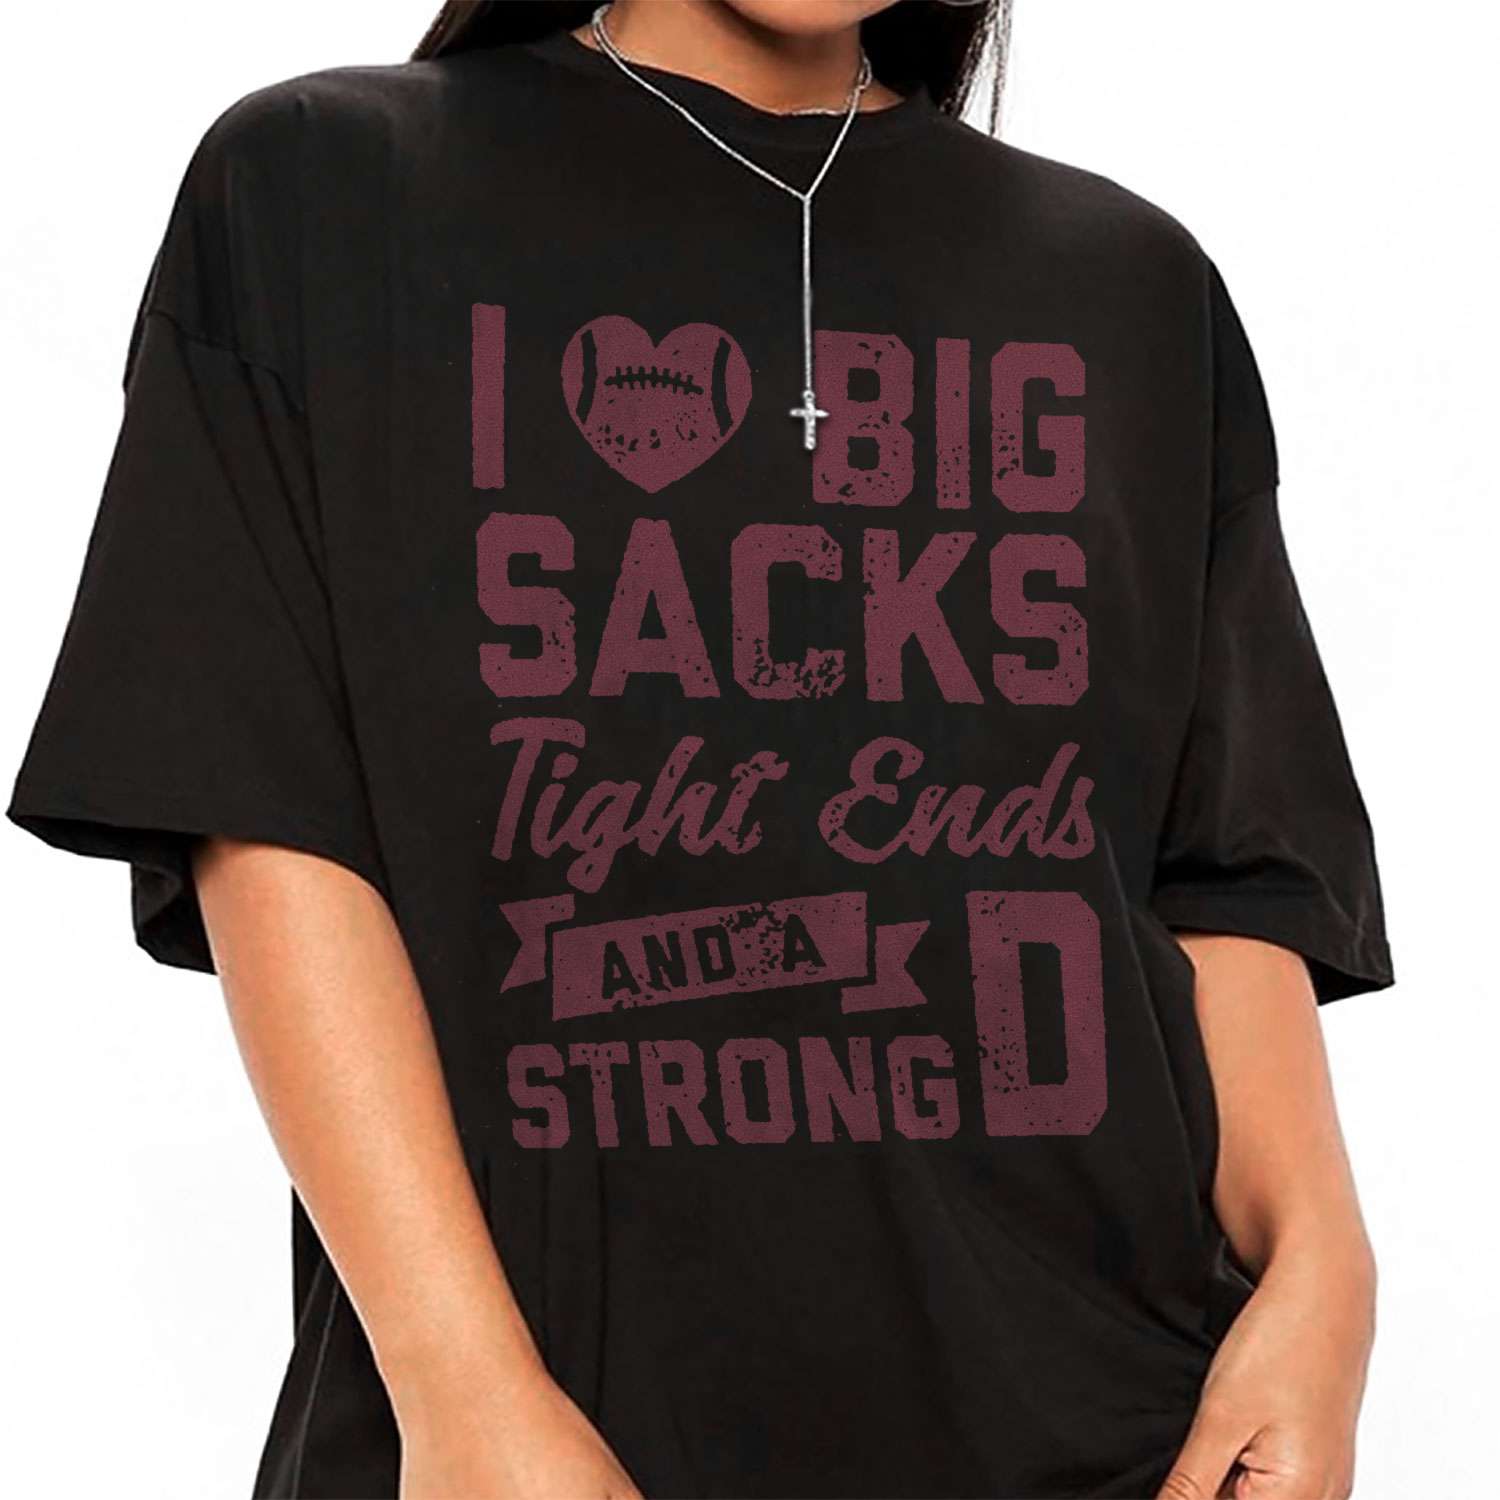 I Love Big Sacks Tight Ends and A Strong D T-shirt